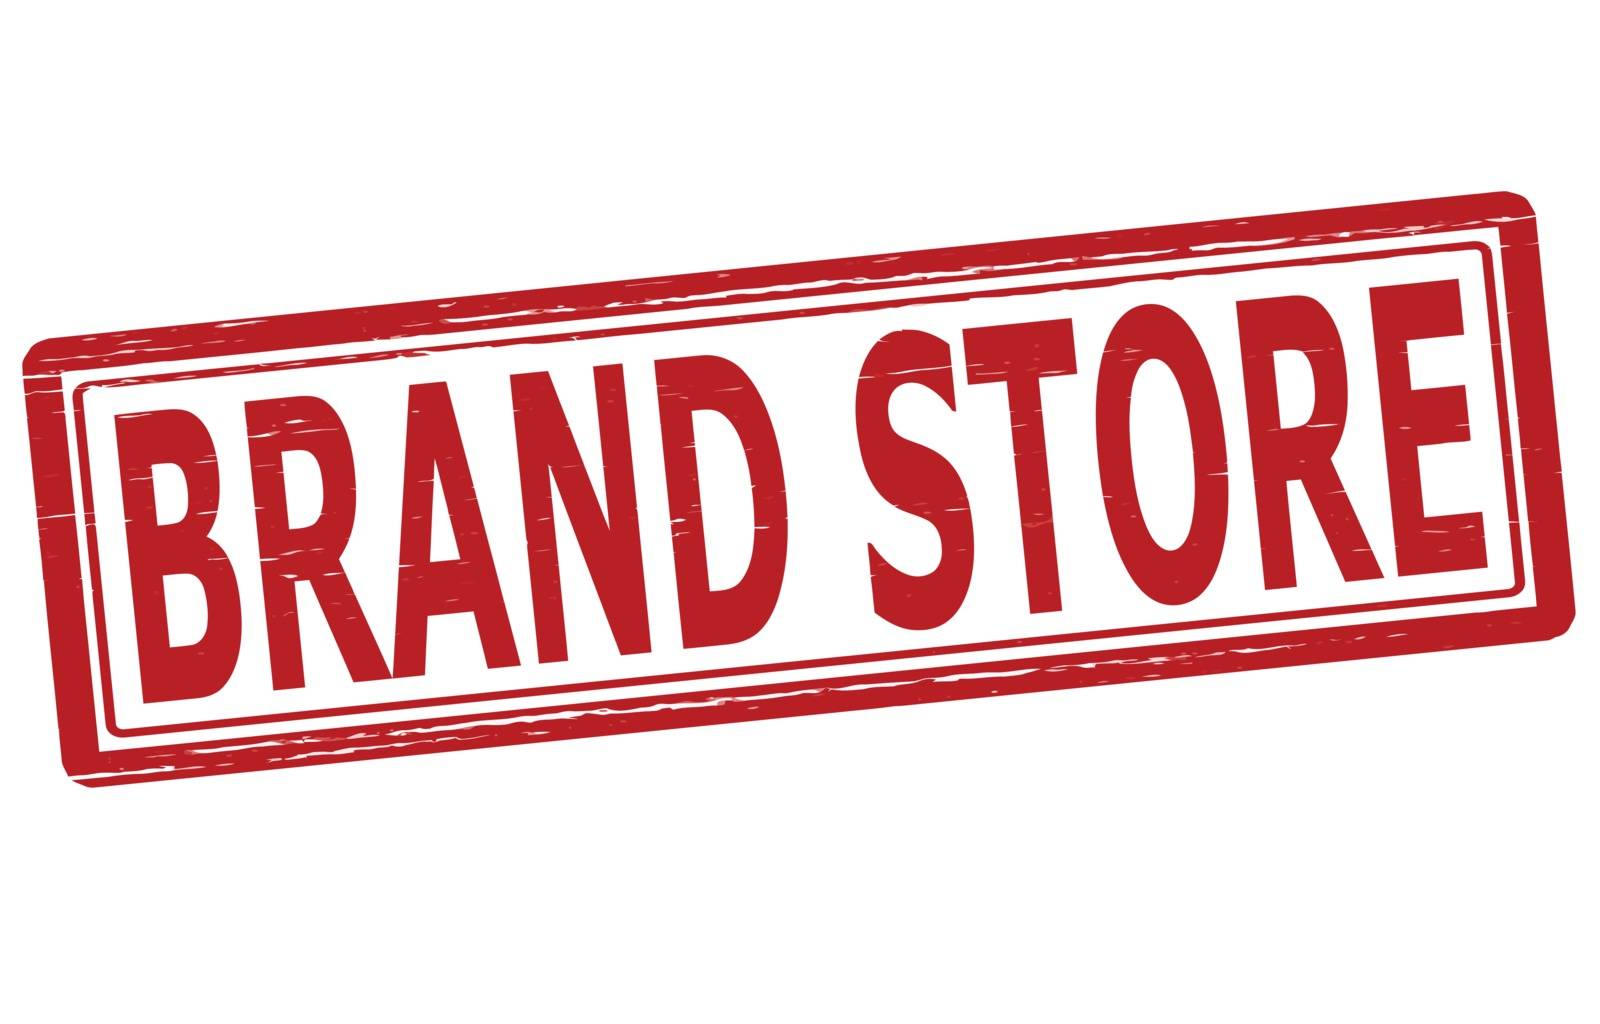 Stamp with text brand store inside,vector illustration